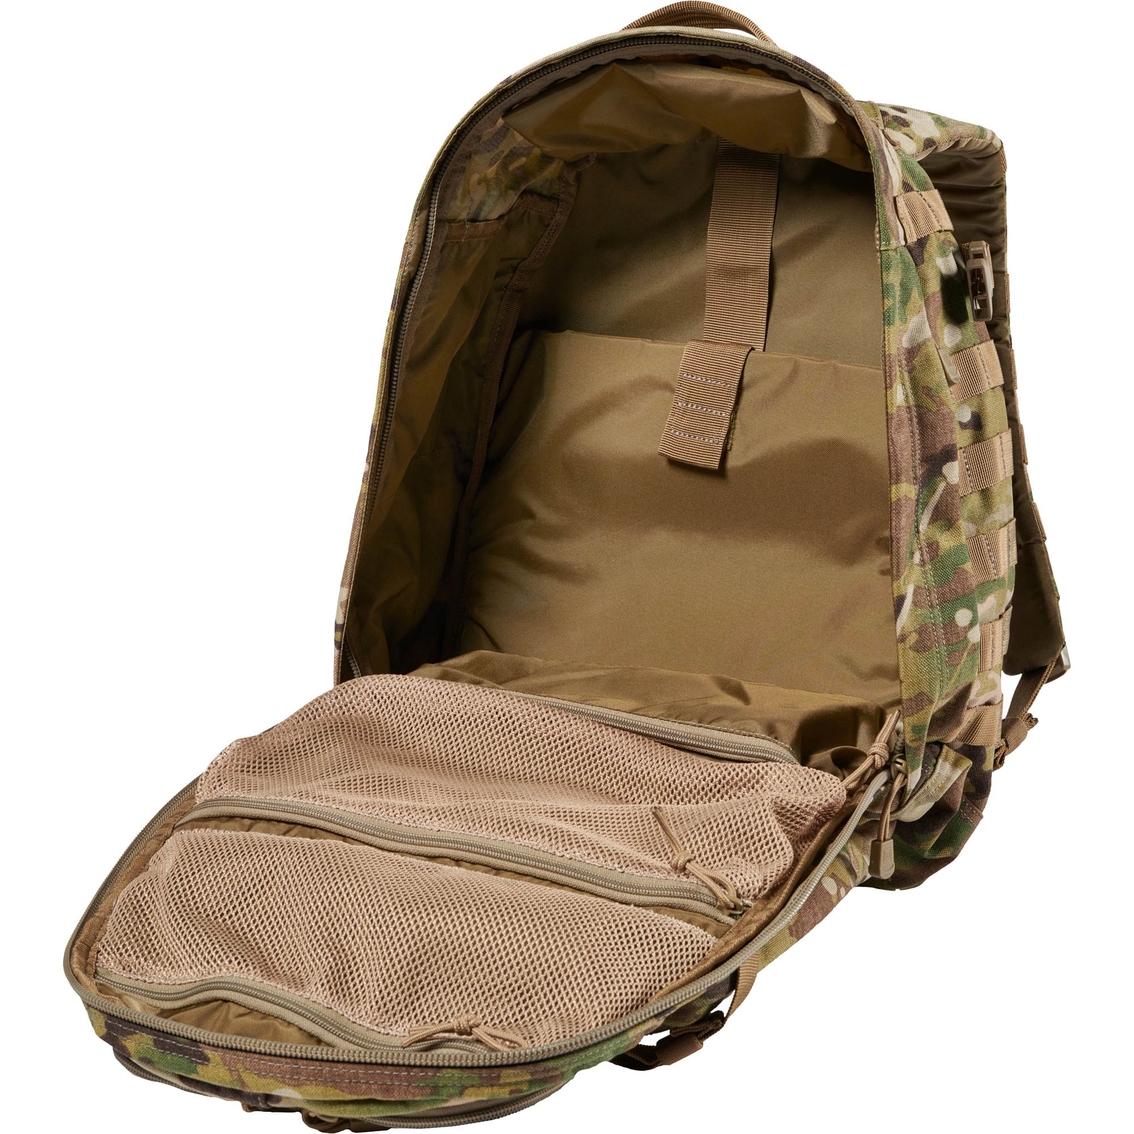 5.11 RUSH 24 2.0 Backpack - Image 8 of 10